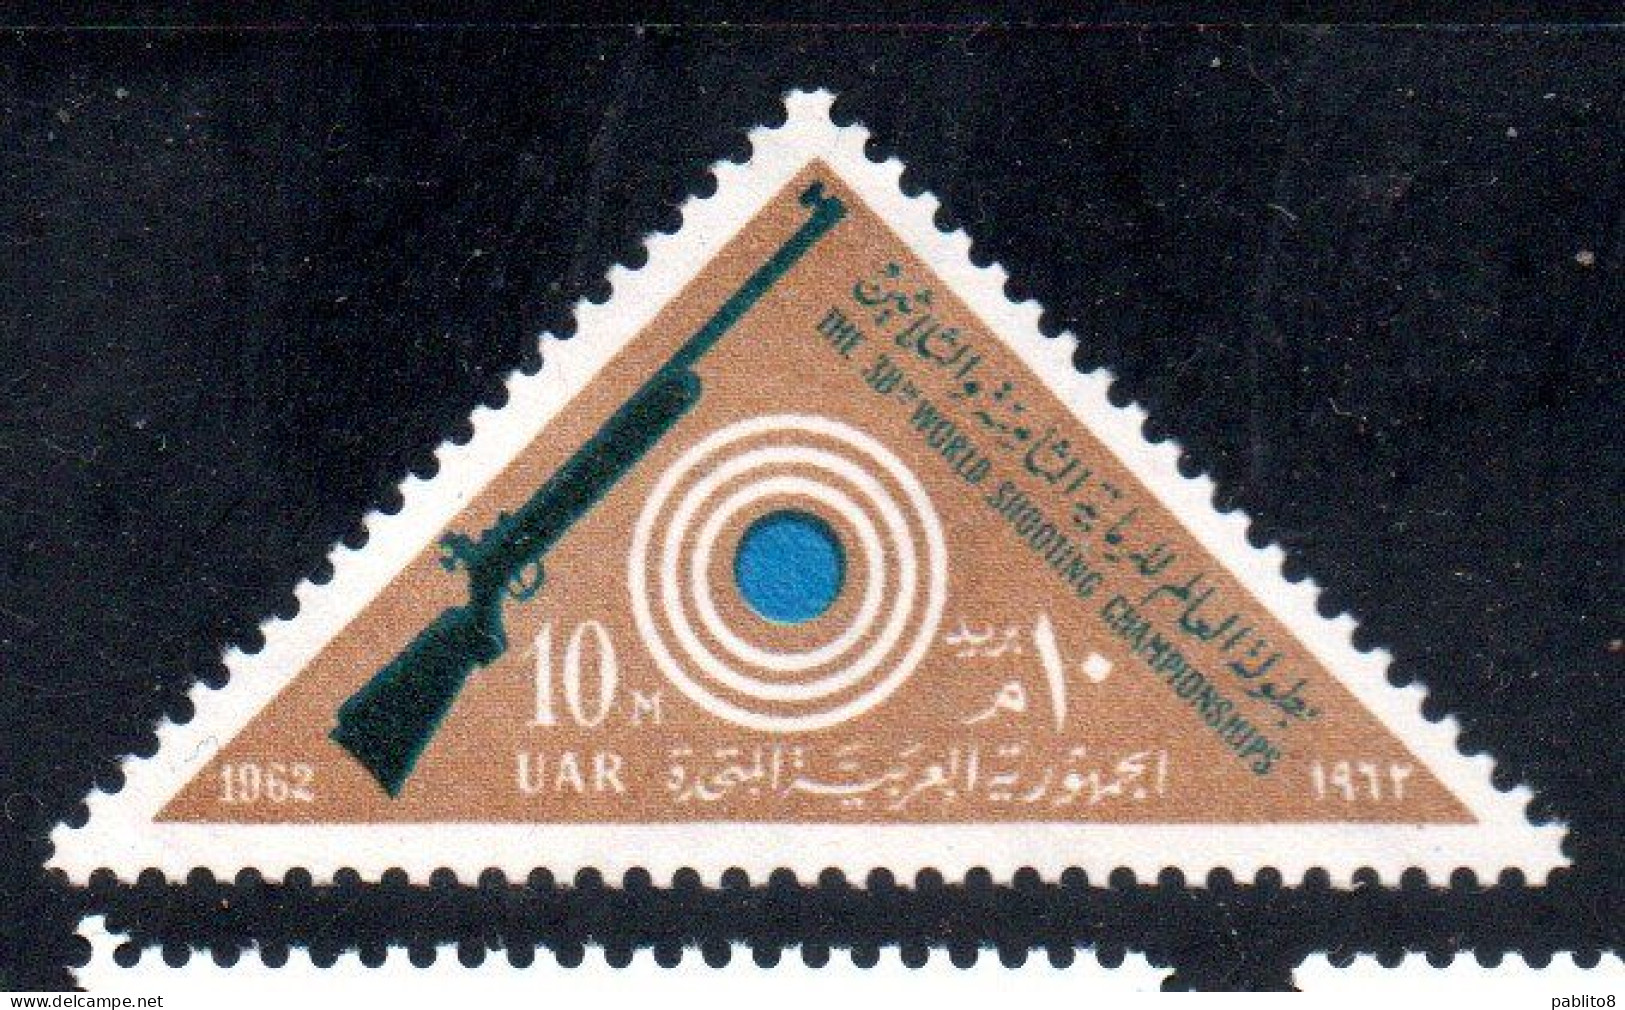 UAR EGYPT EGITTO 1962 WORLD SHOOTING CHAMPIONSHIPS AND AFRICAN TABLE TENNIS TOURNAMENT RIFLE AND TARGET 10m MNH - Neufs